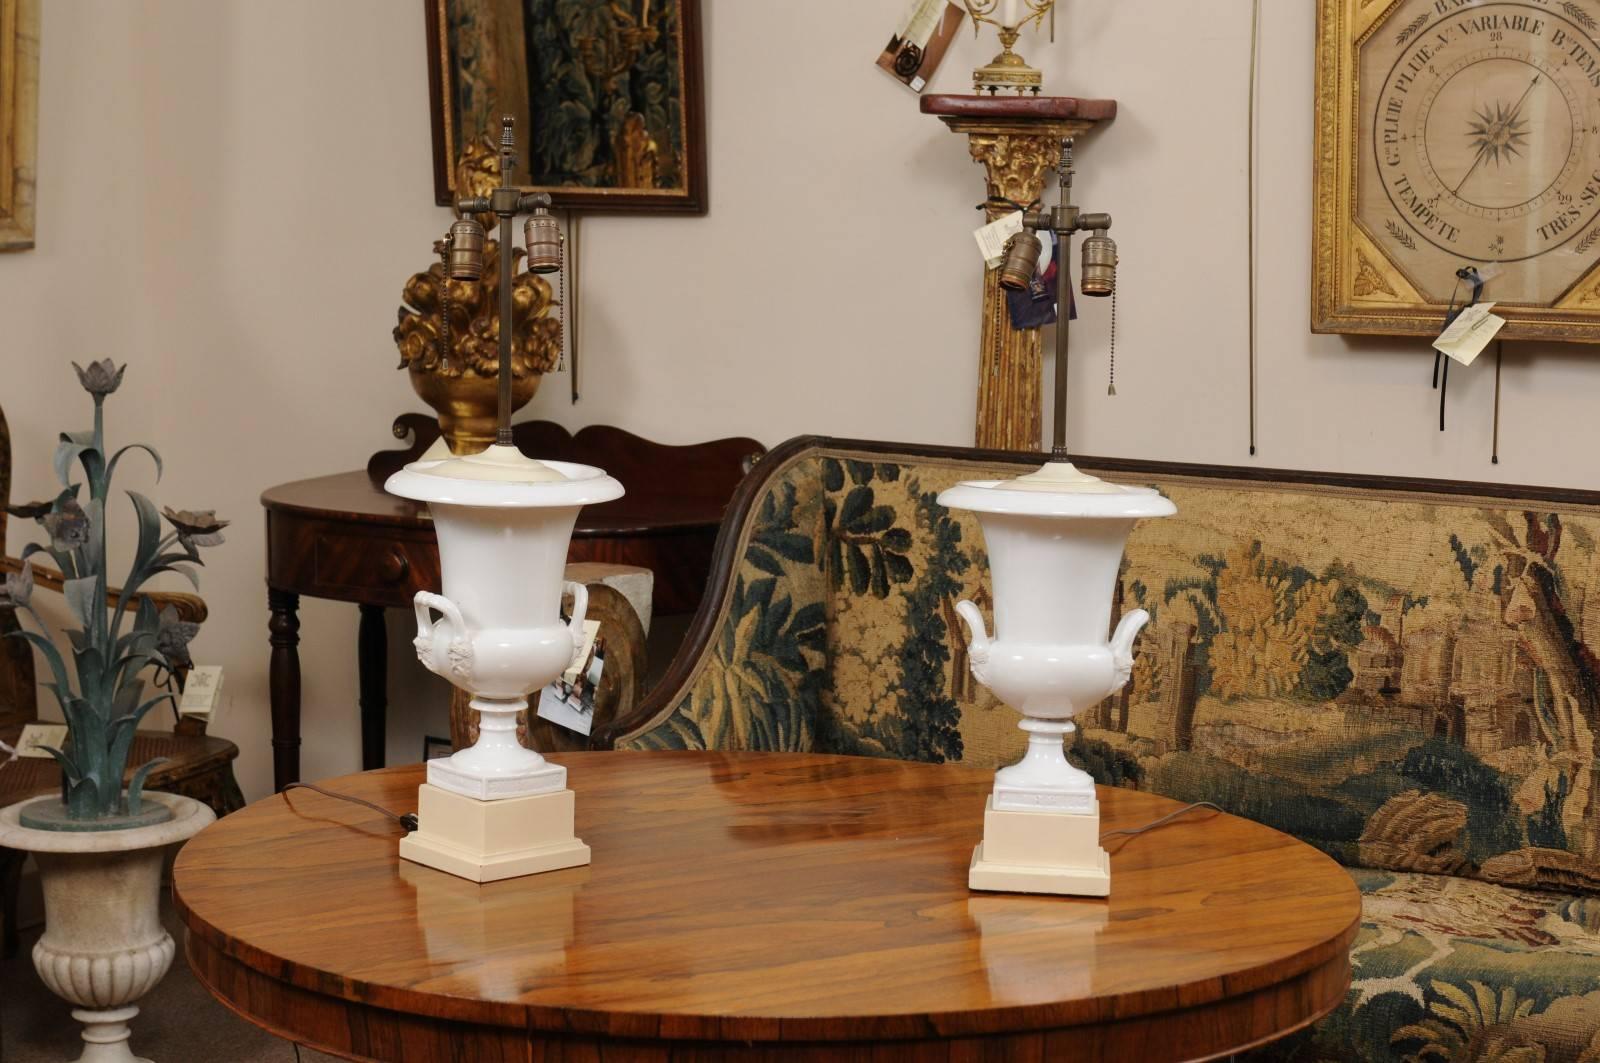 Pair of 19th century Continental Neoclassical style white porcelain urns, wired as lamps with two (2) light sockets.